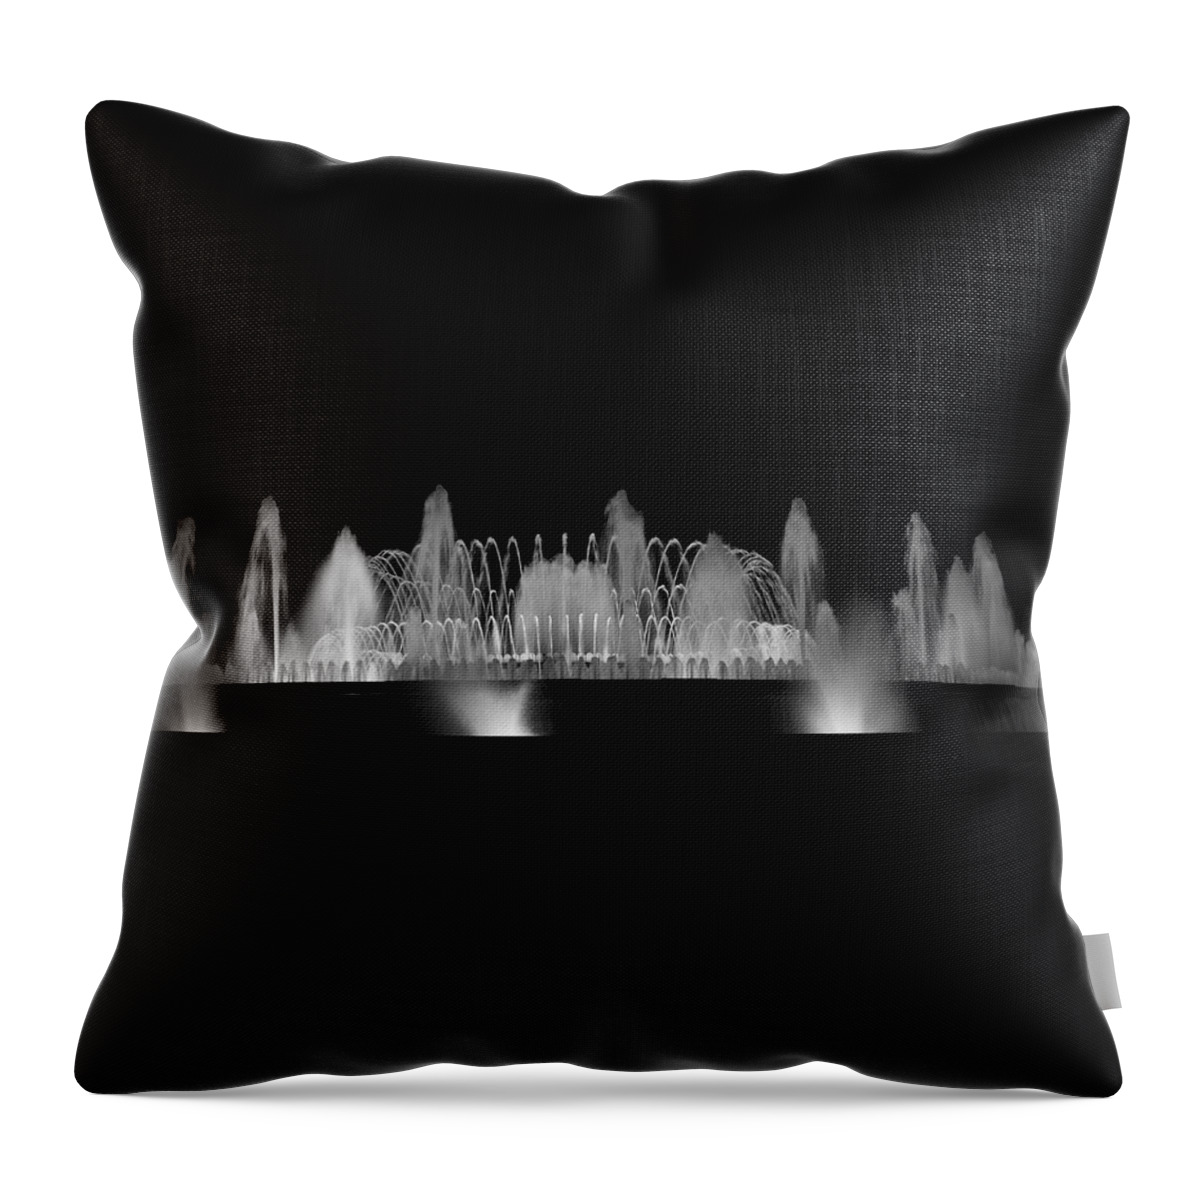 Barcelona Throw Pillow featuring the photograph Barcelona Fountain Nightlights by Farol Tomson